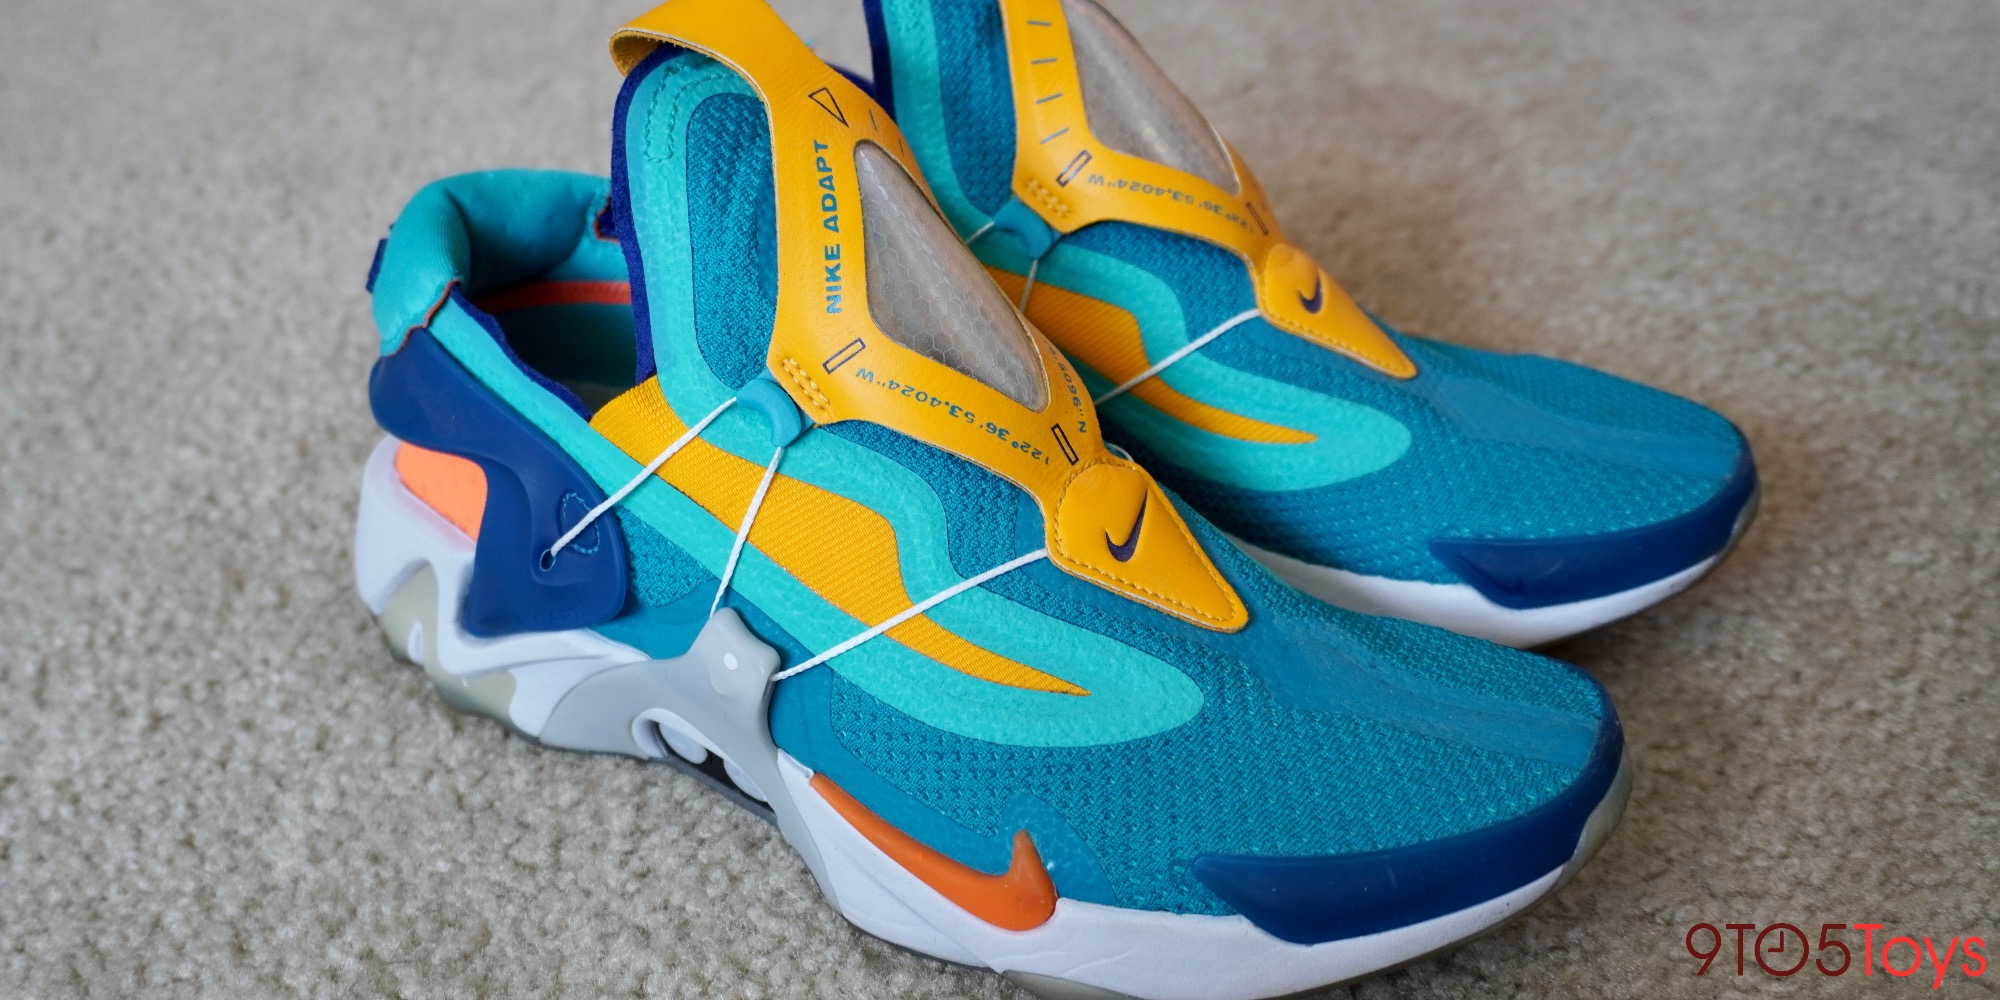 Nike sneakers review: Futuristic footwear, today - 9to5Toys